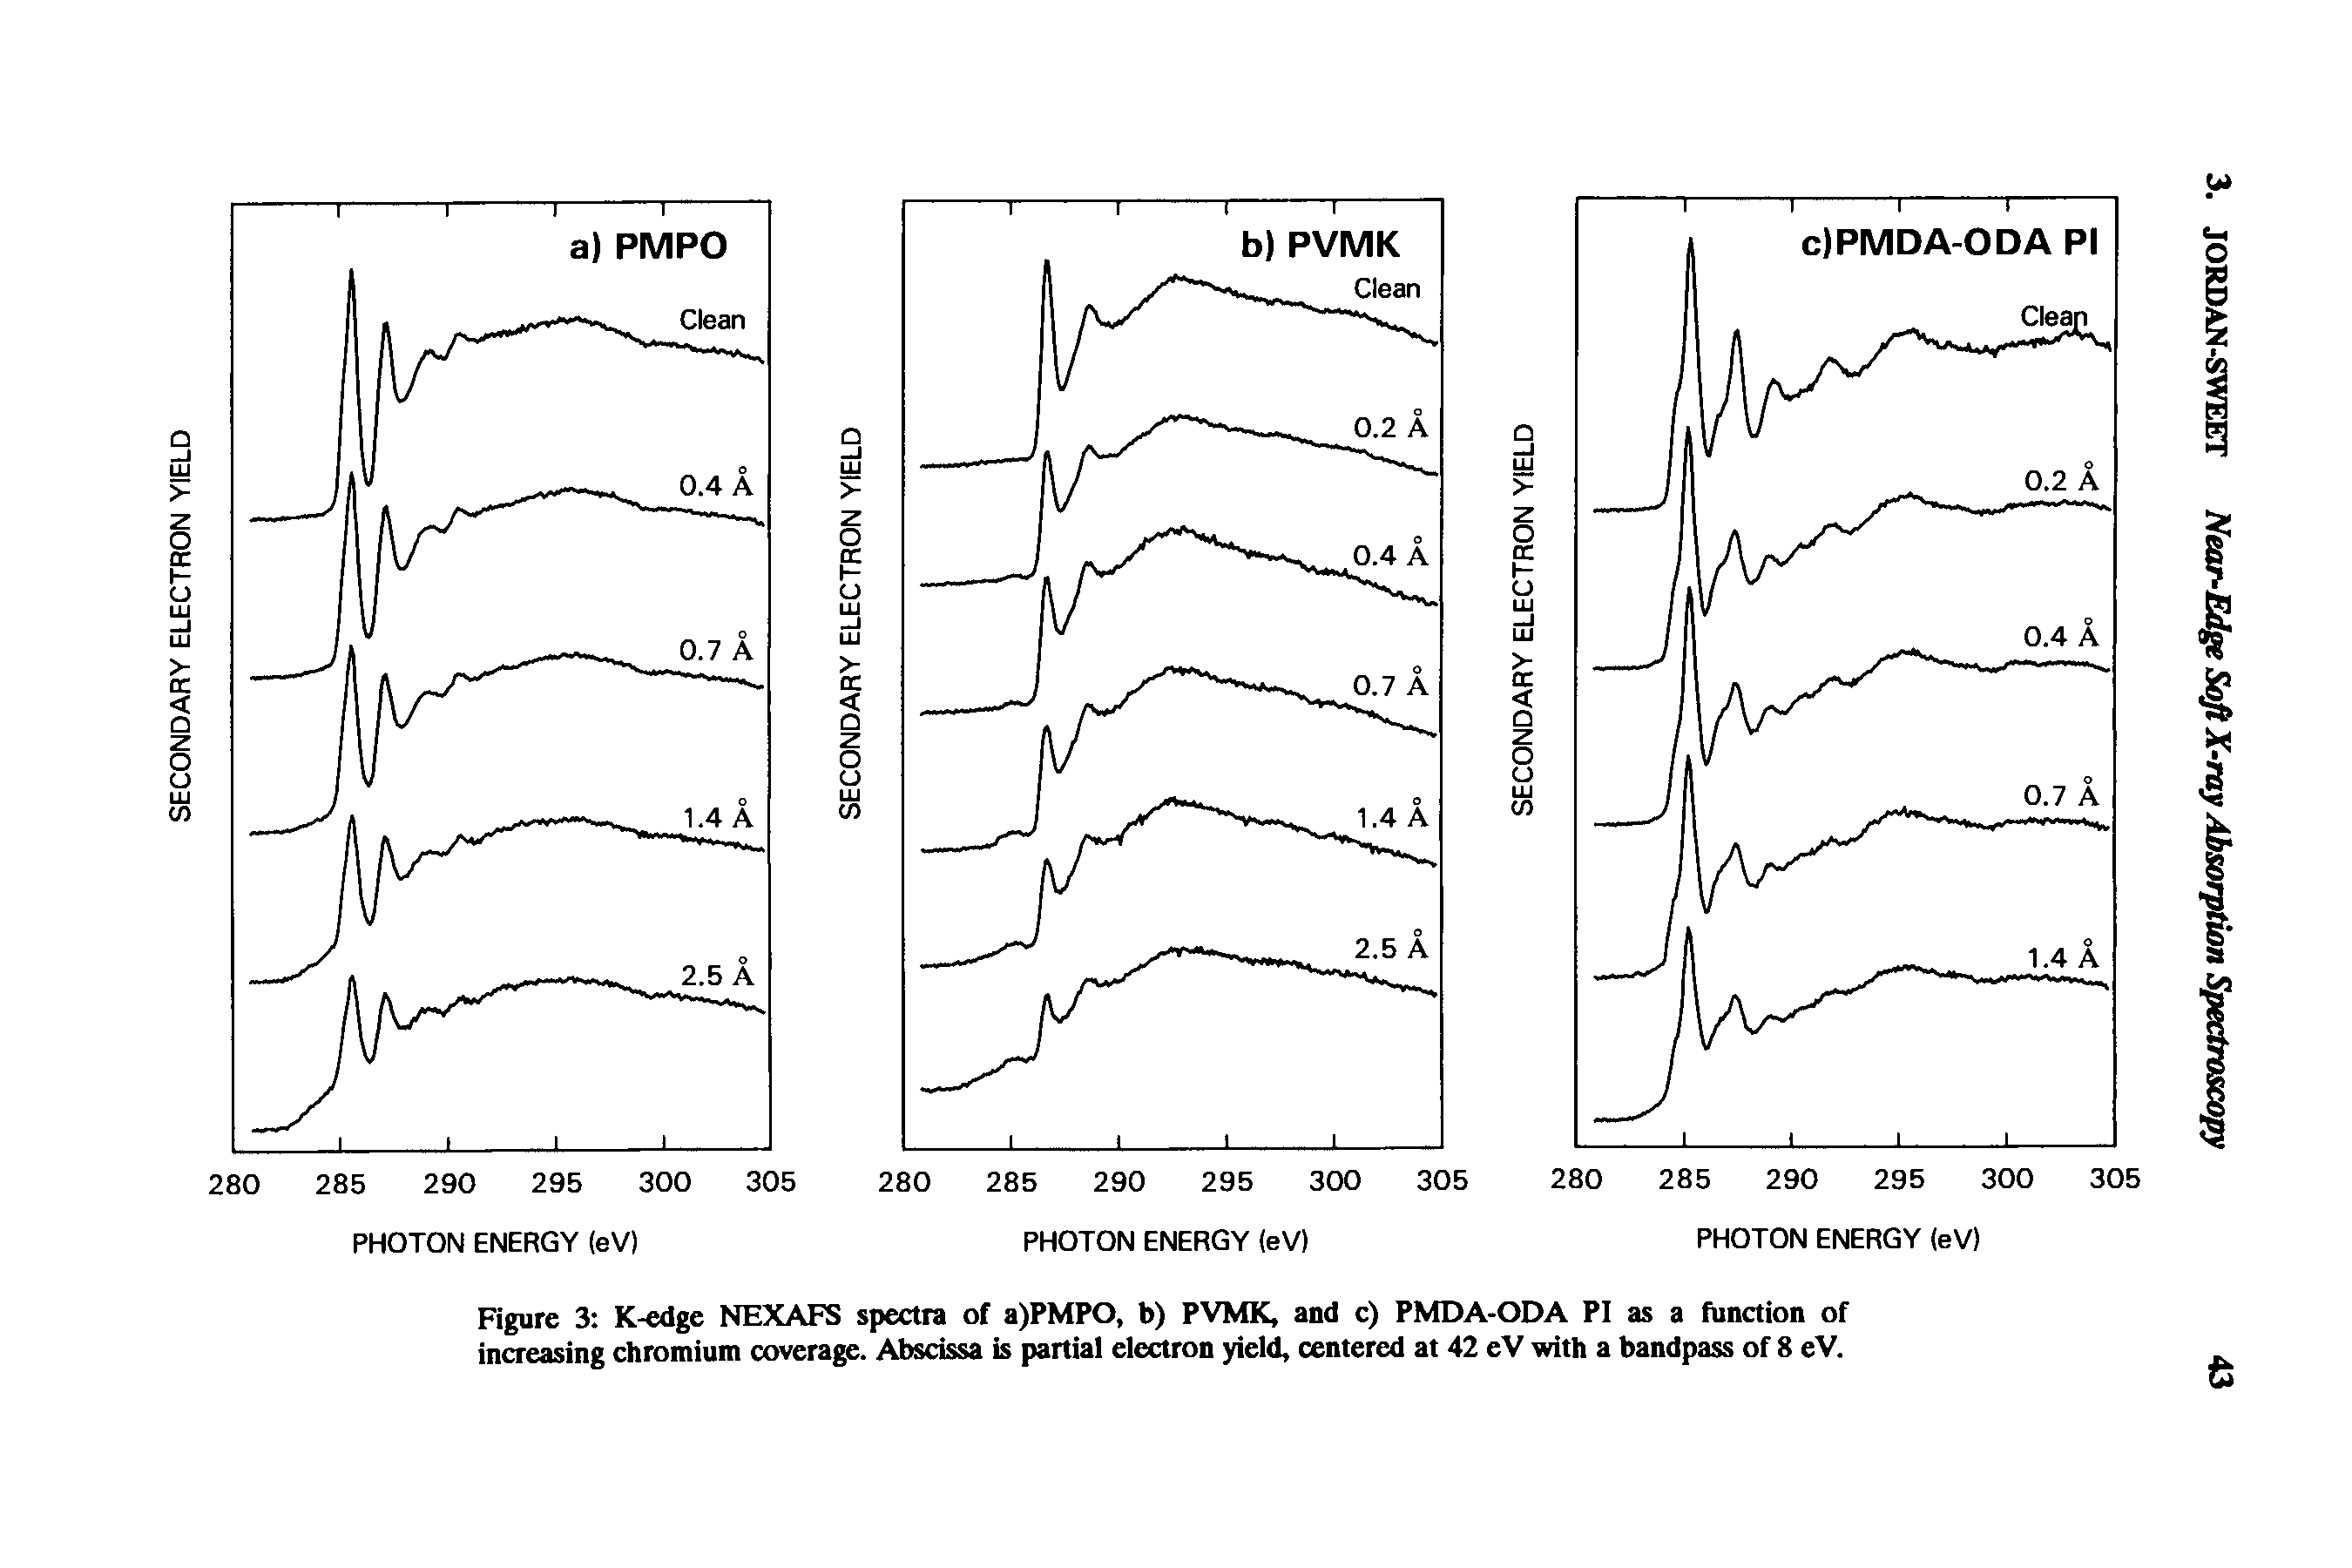 Figure 3 K-edge NEXAFS spectra of a)PMPO, b) PVMK, and c) PMDA-ODA PI as a function of increasing chromium coverage. Abscissa is partial electron yield, centered at 42 eV with a bandpass of 8 eV.